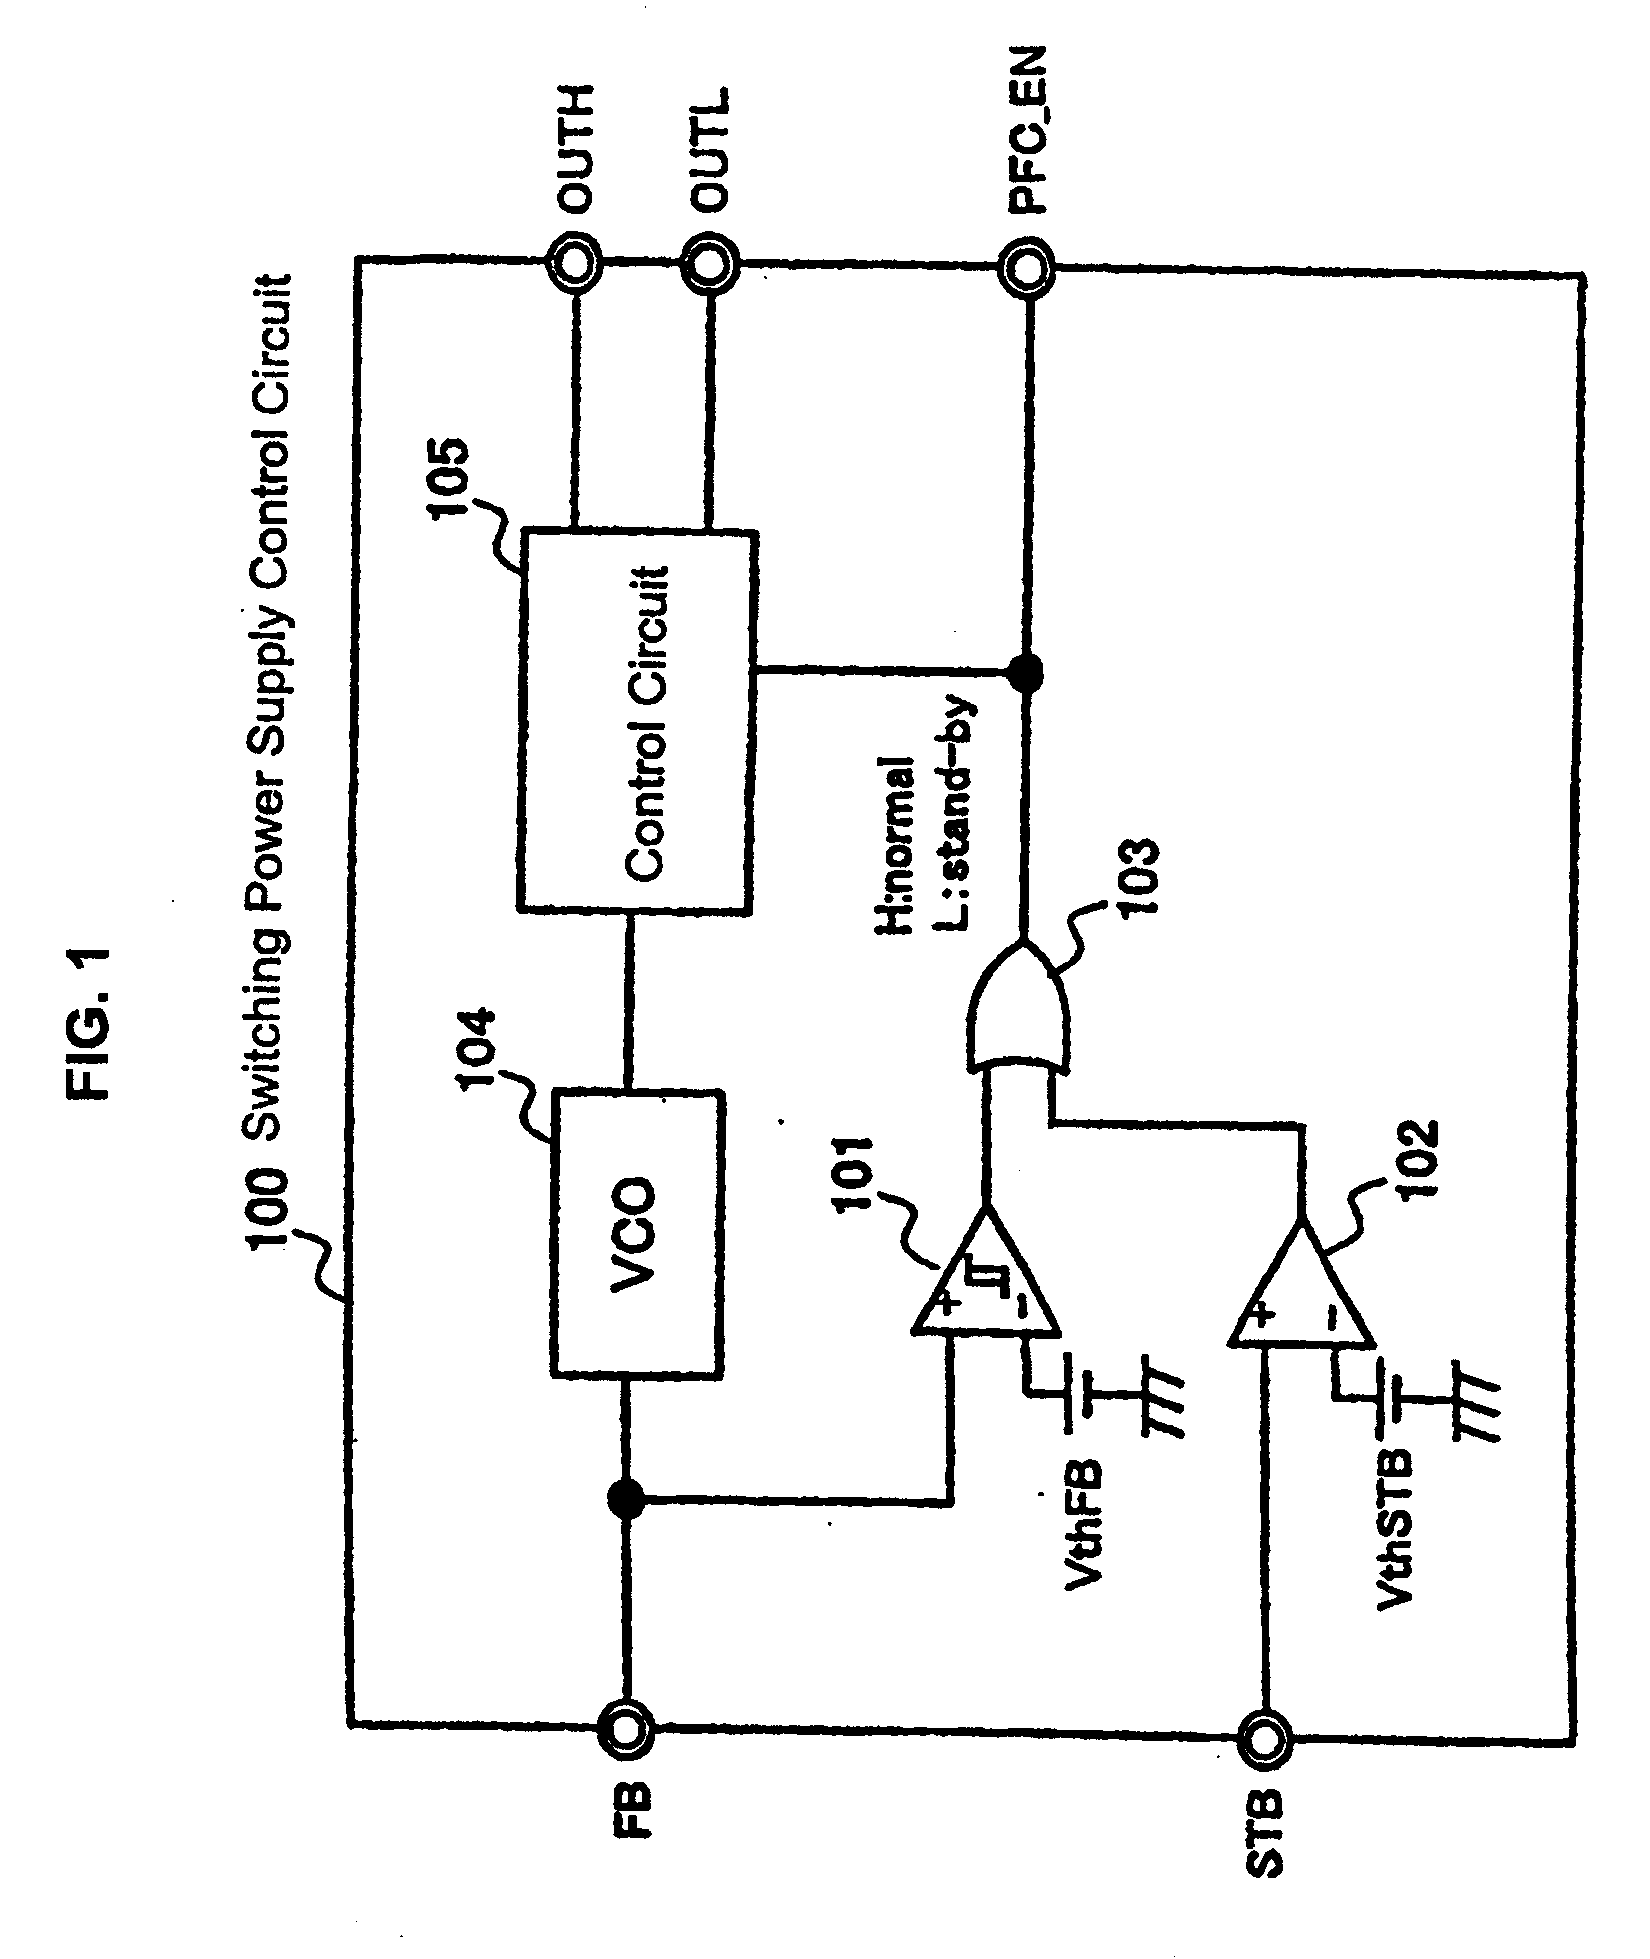 Switching power supply control circuit